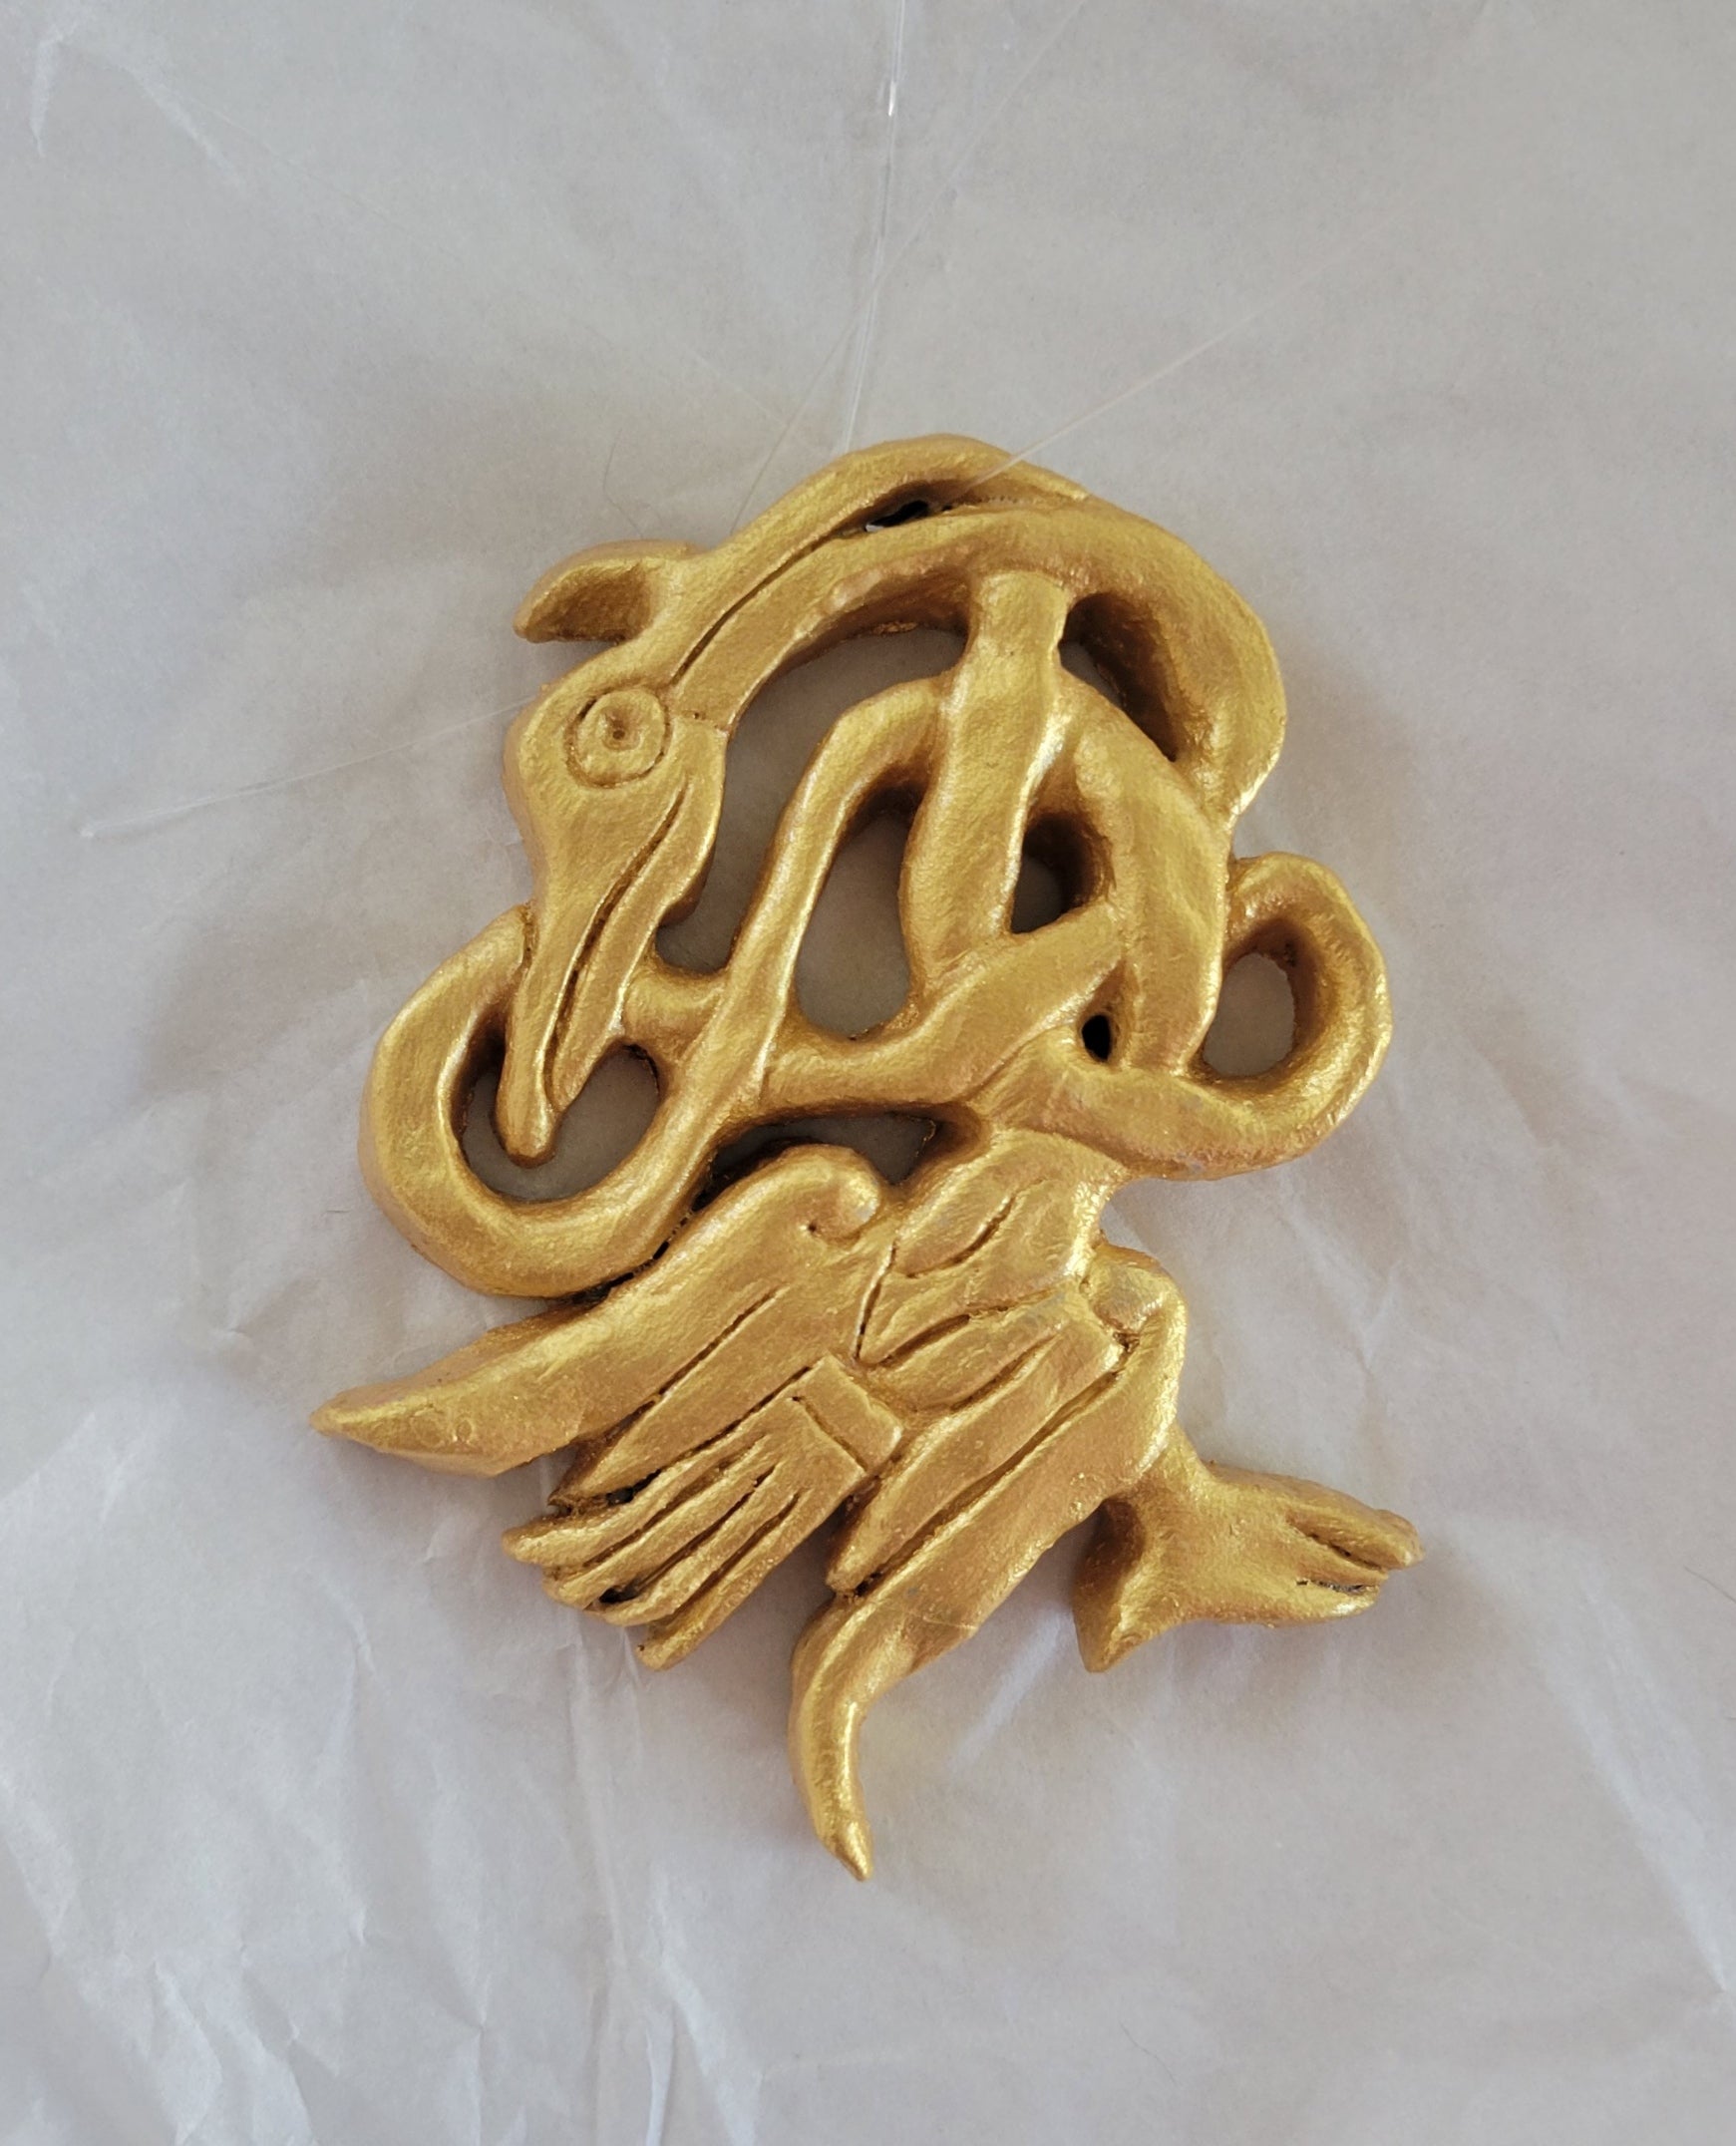 Golden Celtic bird ornament with Celtic knot work.  Hand made out of clay and hand painted.  Size: Approximately 3" x 4" 